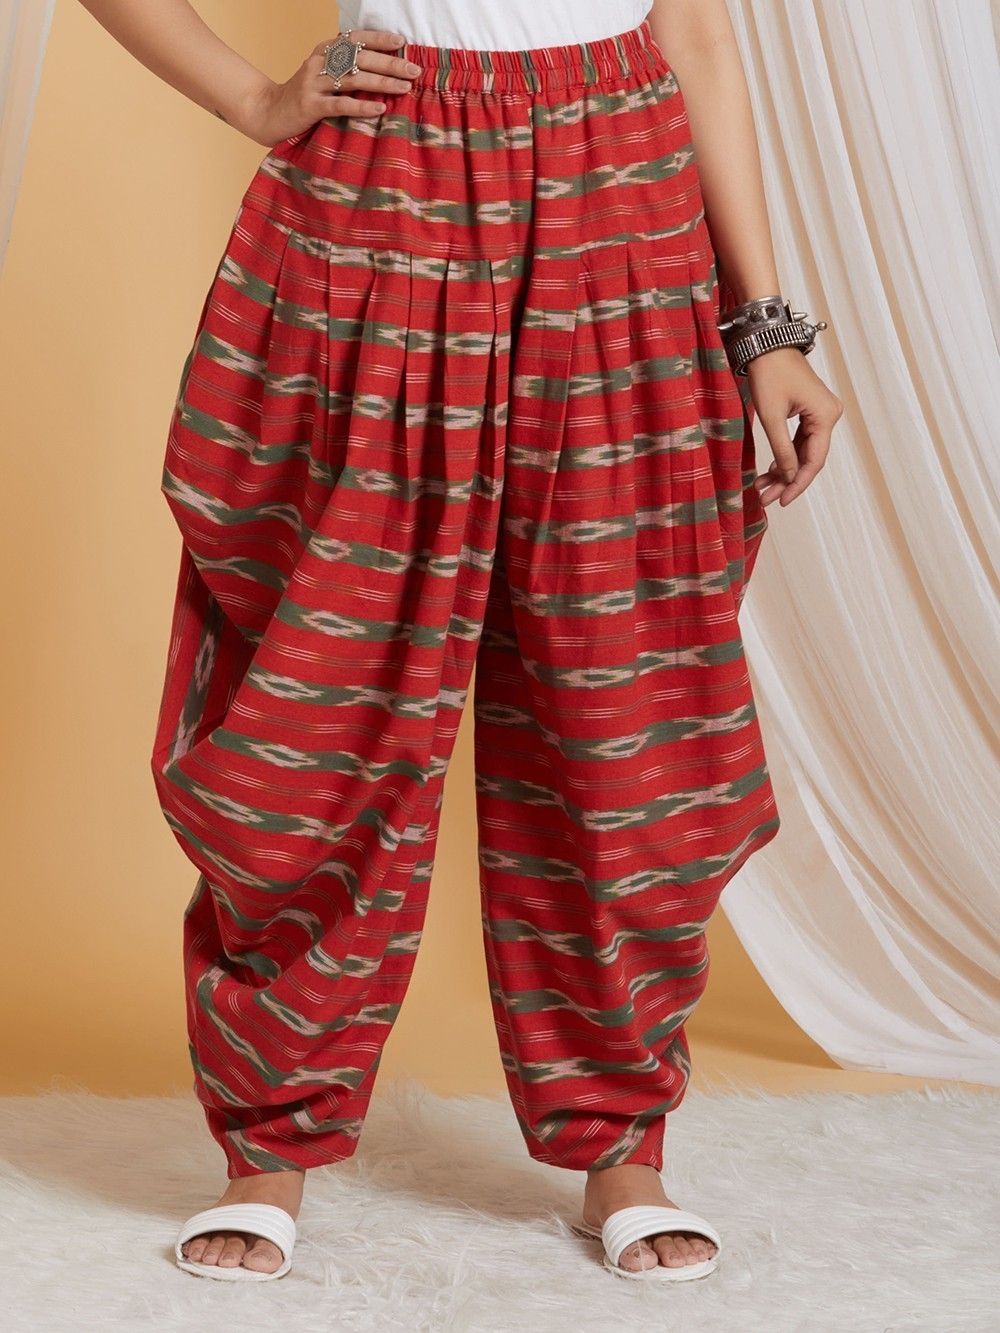 MEDEIROS Dhoti Pants Cotton Ikat Beige and Red - Beunic